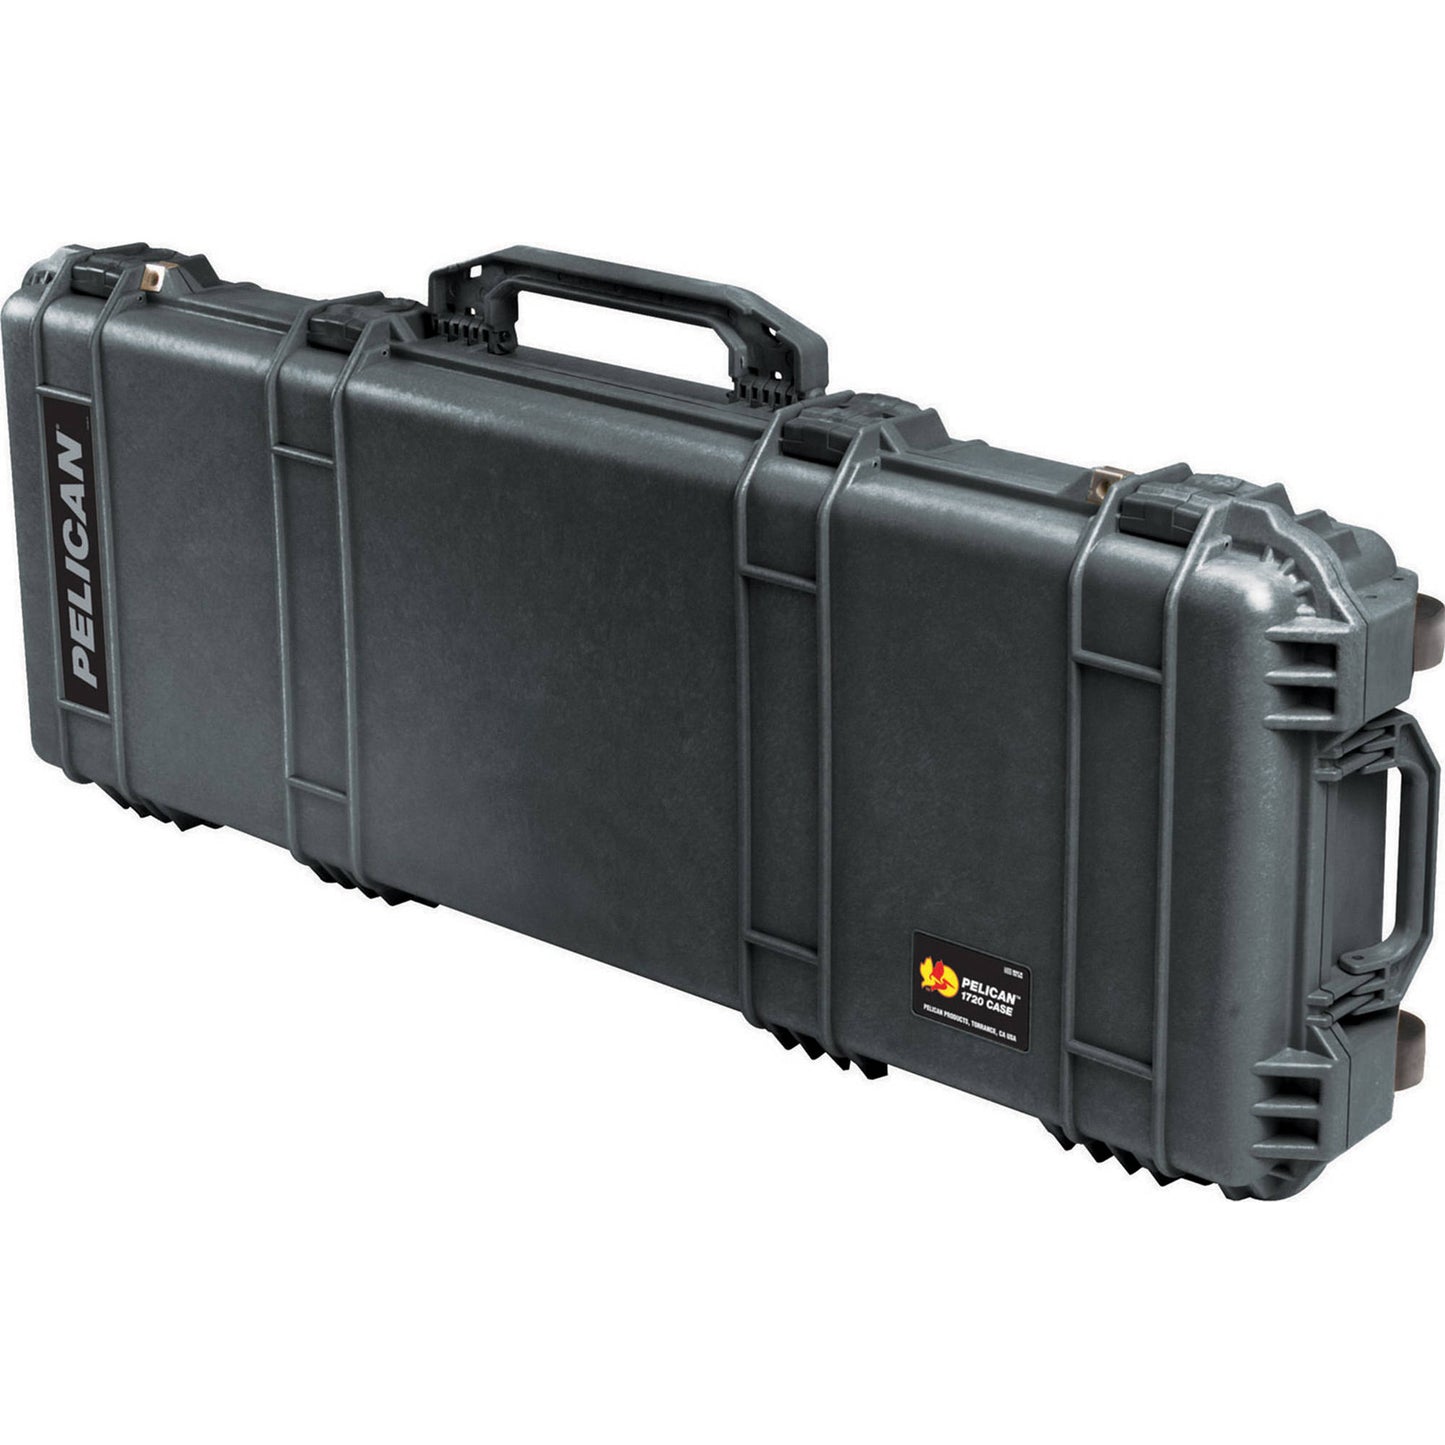 Pelican 1720 Long Protector Case Watertight Dustproof Unbreakable Hard Weapon Casing with Wheels, Foldable Side Handle, Foam Set, Automatic Pressure Equalization Valve (Black)